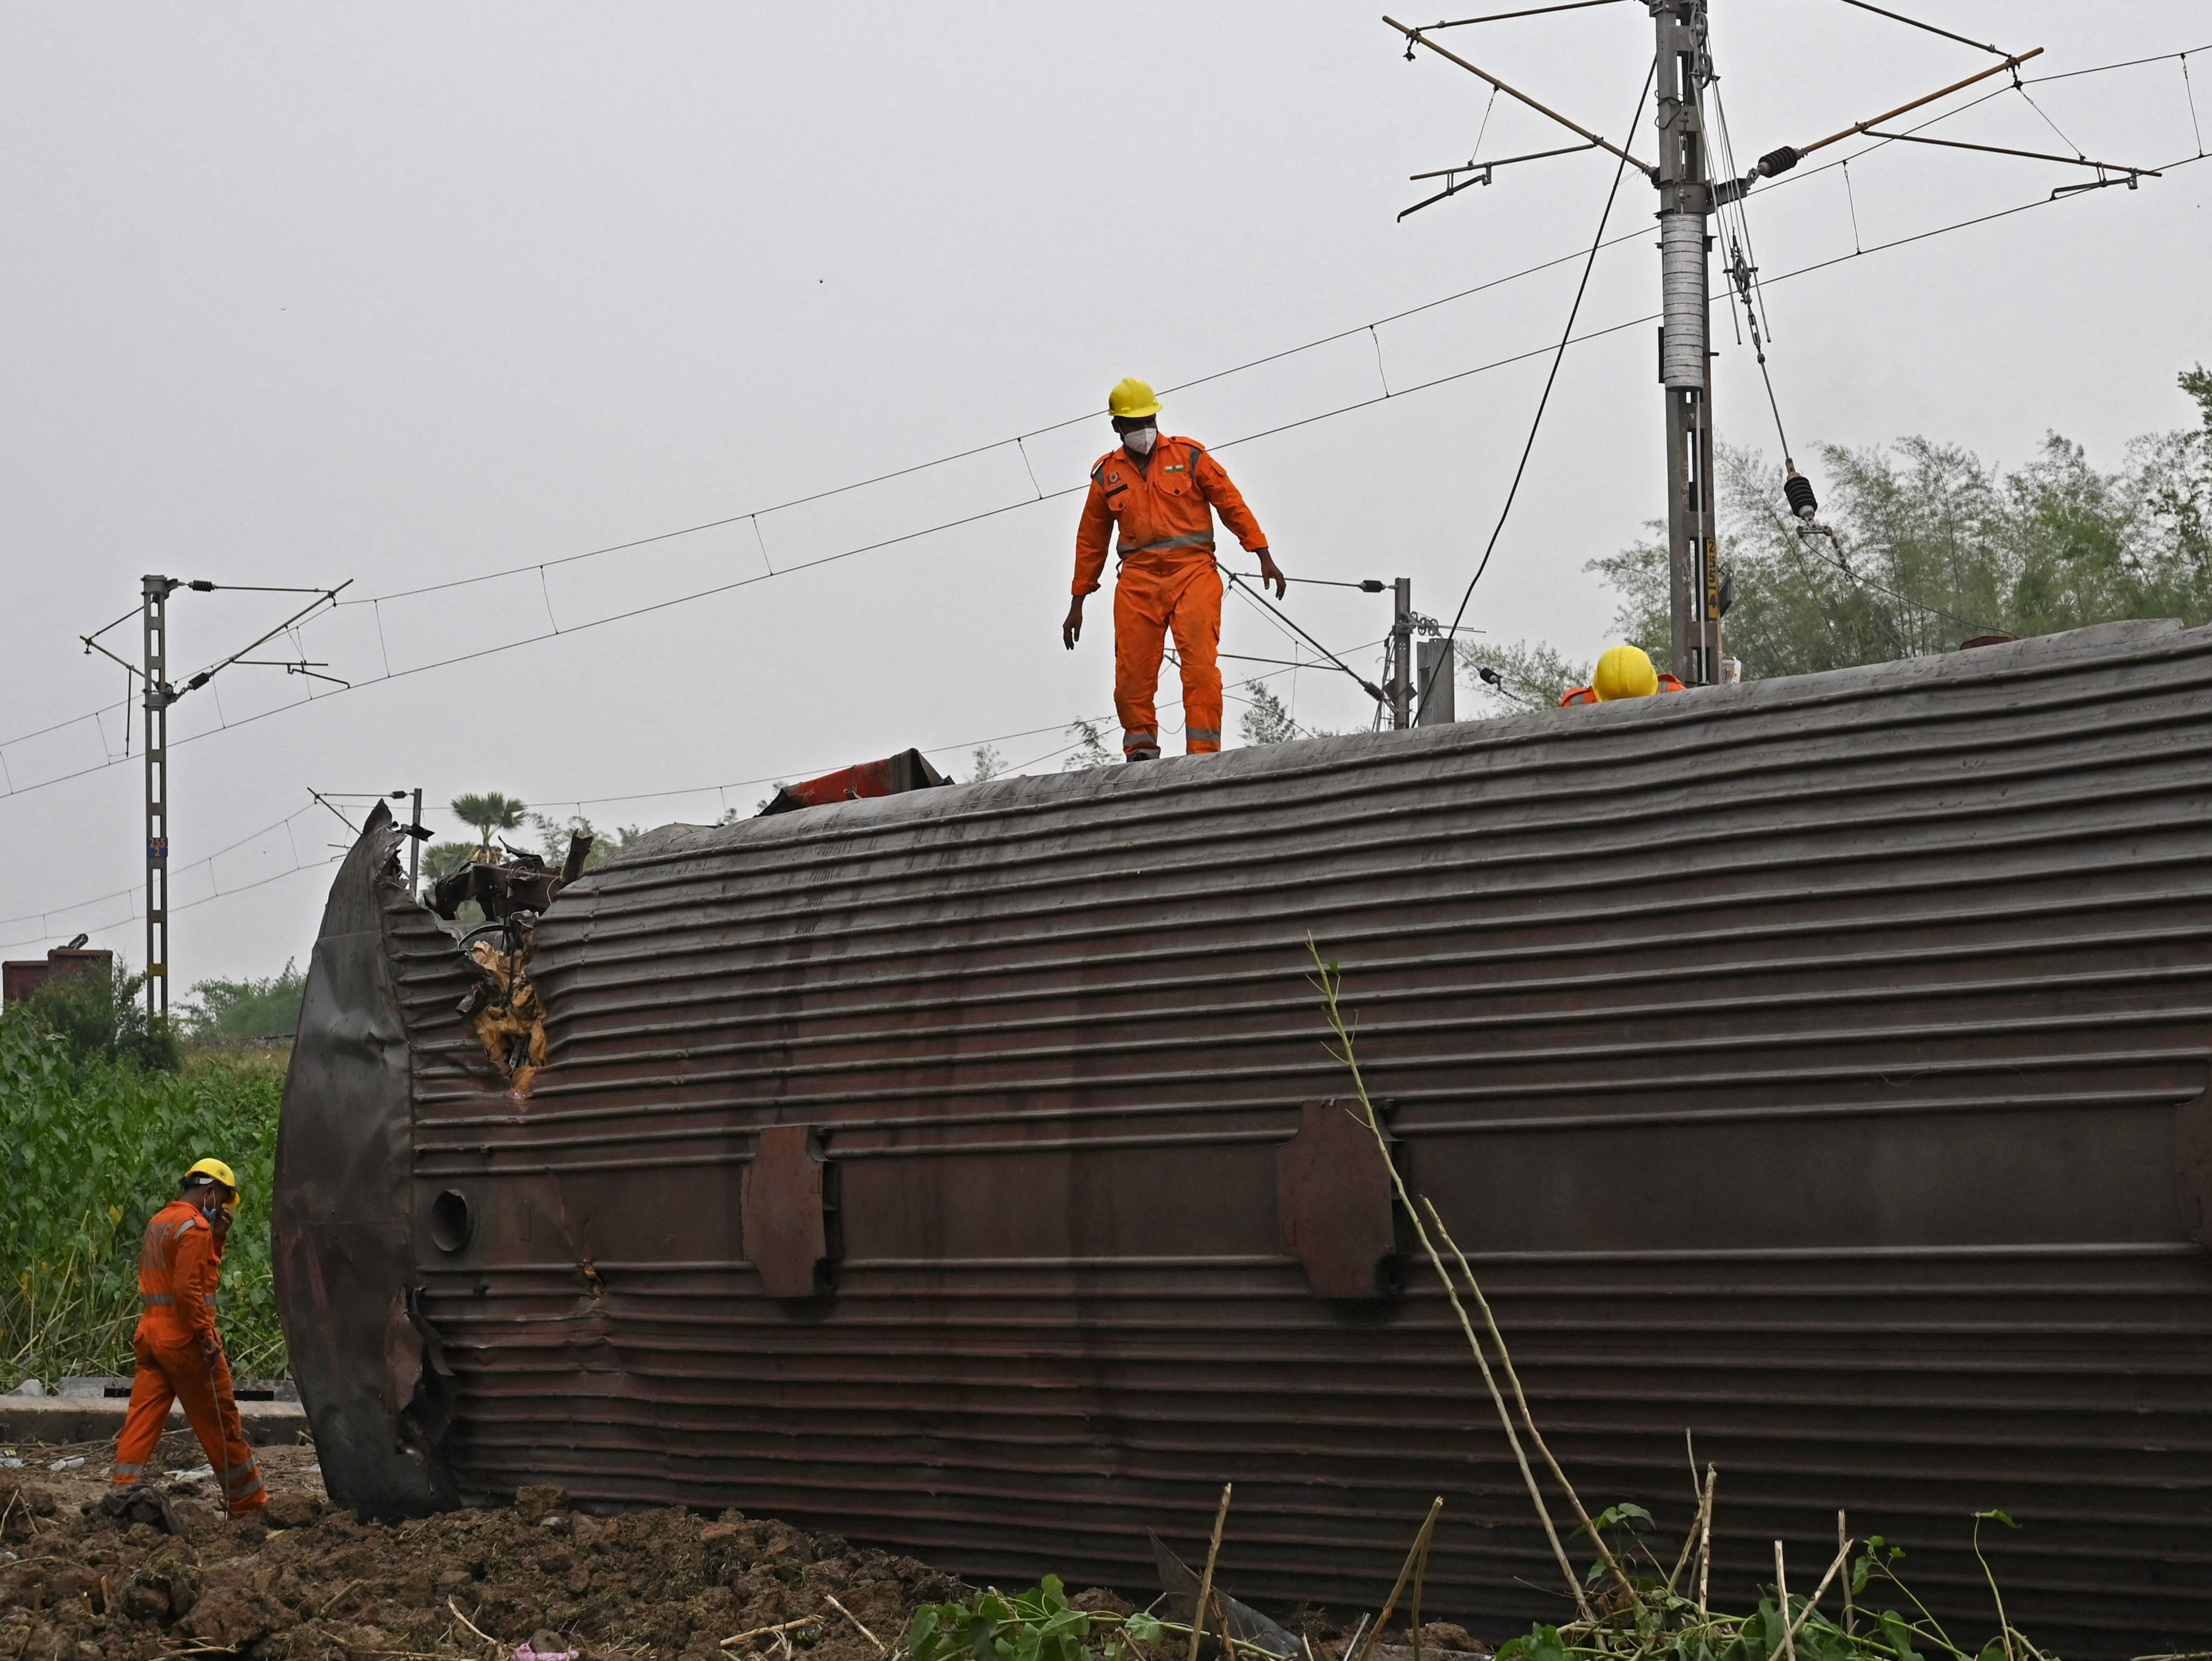 Rescue workers inspect an overturned carriage after the worst train disaster in India this century